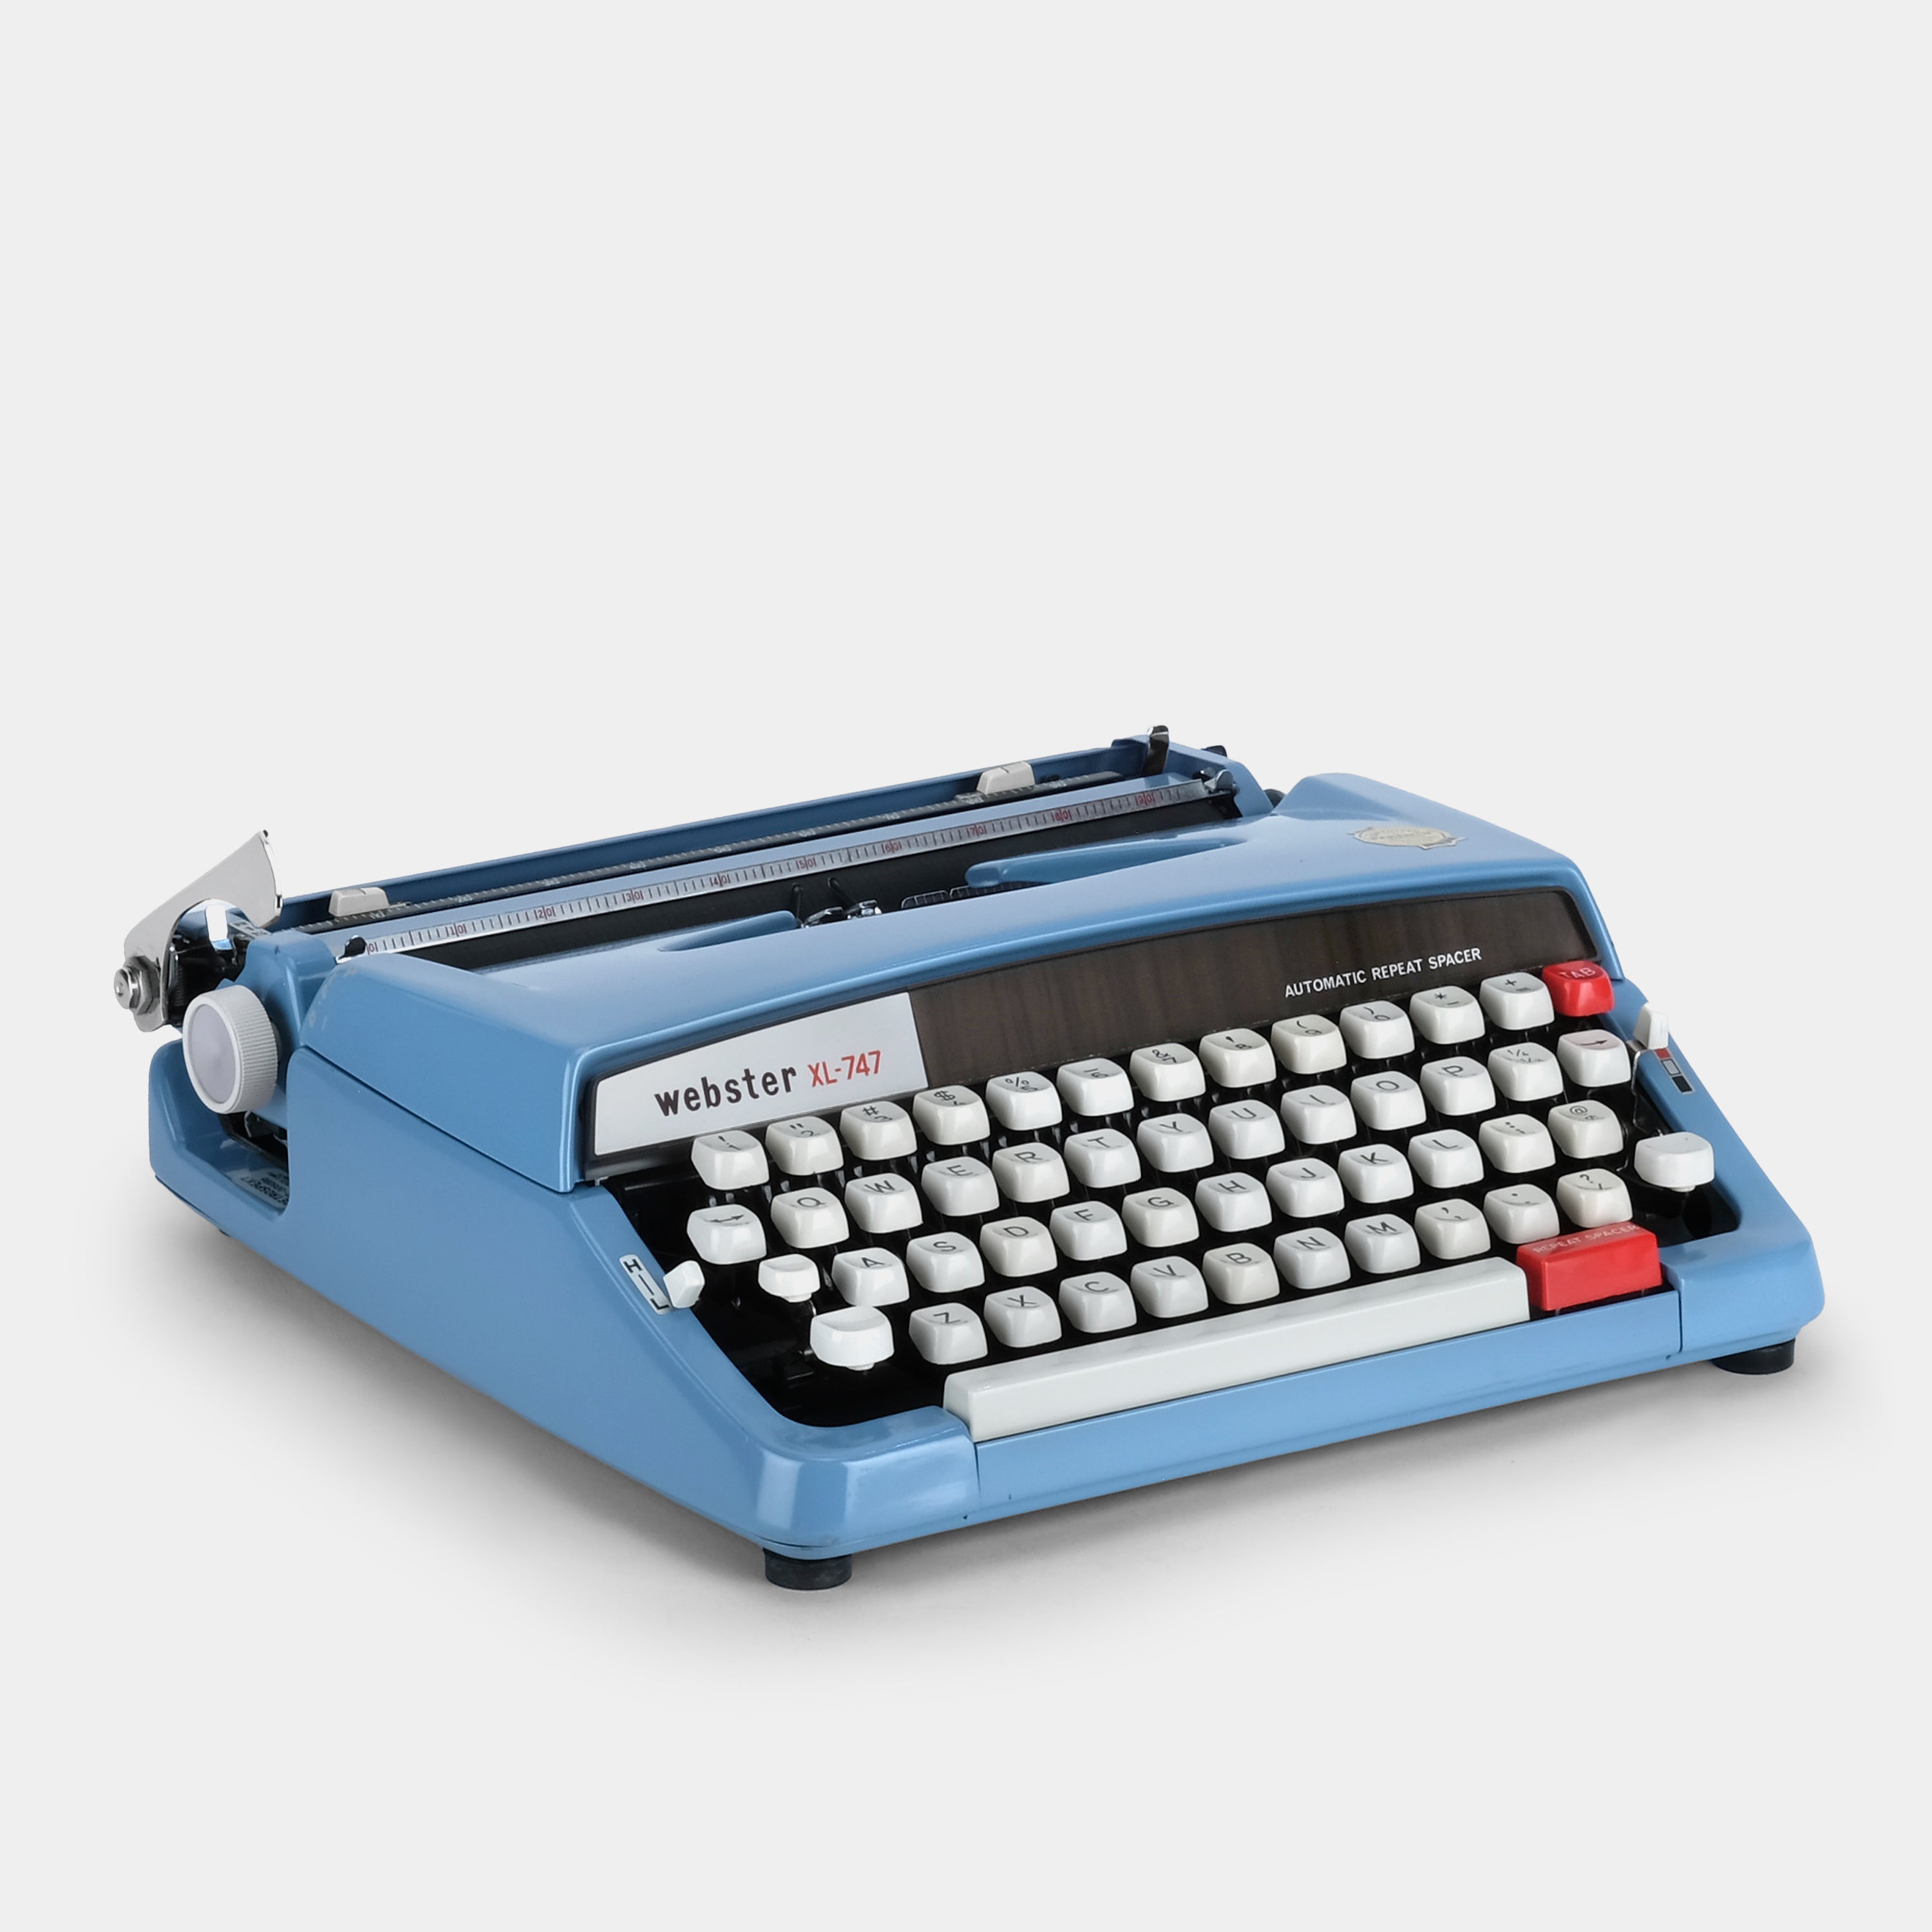 Brother Webster XL-747 Blue Manual Typewriter and Case